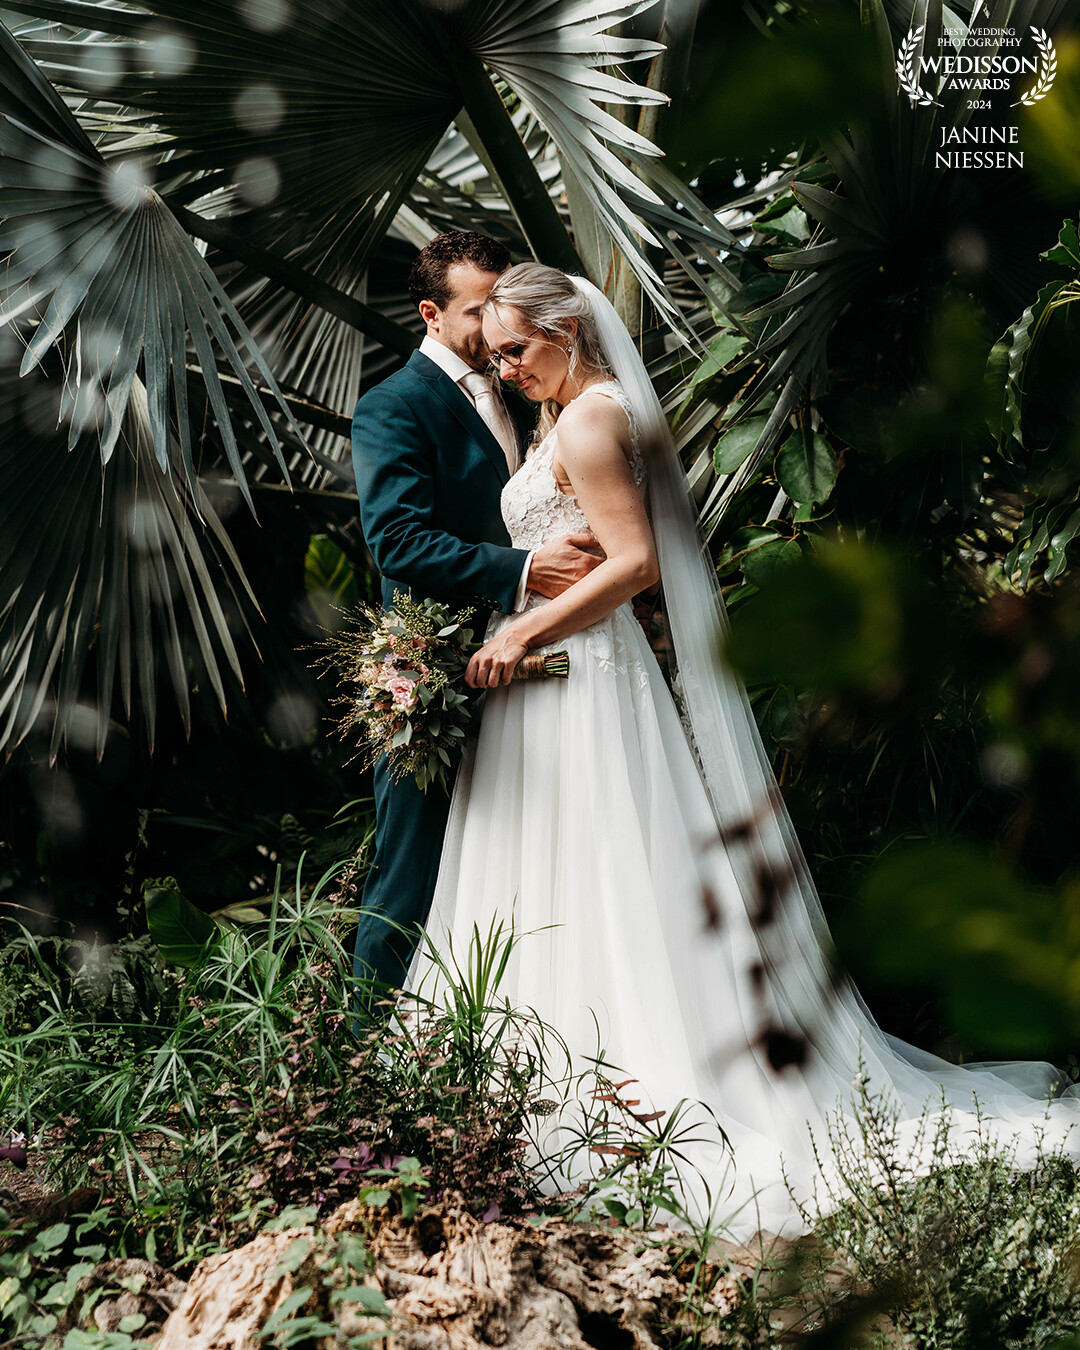 In the midst of lush greenery, their love shone bright. Standing close in the bushes, they captured a moment of pure romance that will last a lifetime.